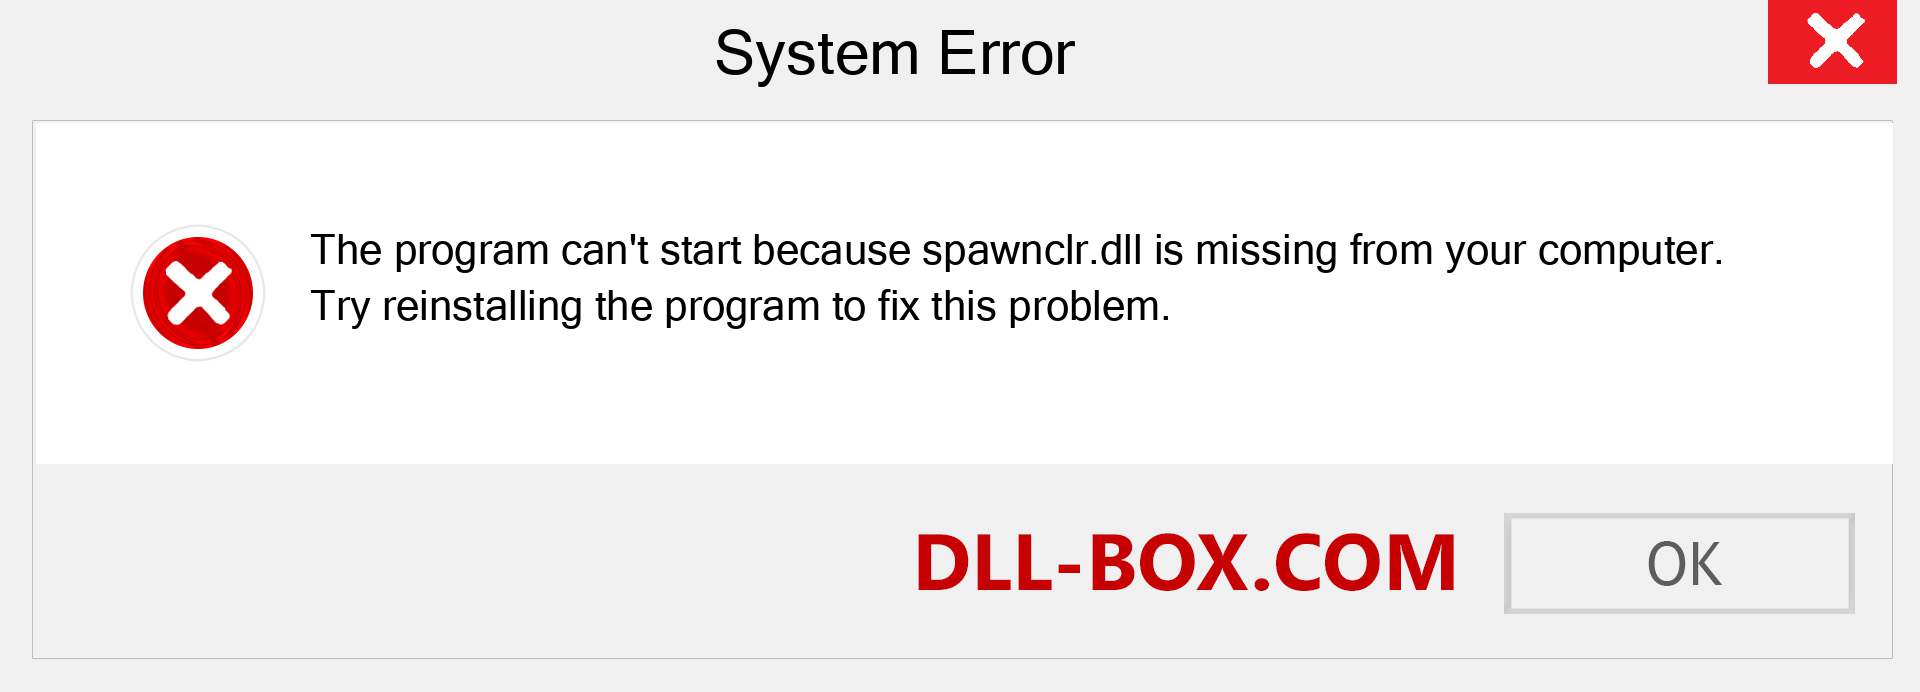  spawnclr.dll file is missing?. Download for Windows 7, 8, 10 - Fix  spawnclr dll Missing Error on Windows, photos, images